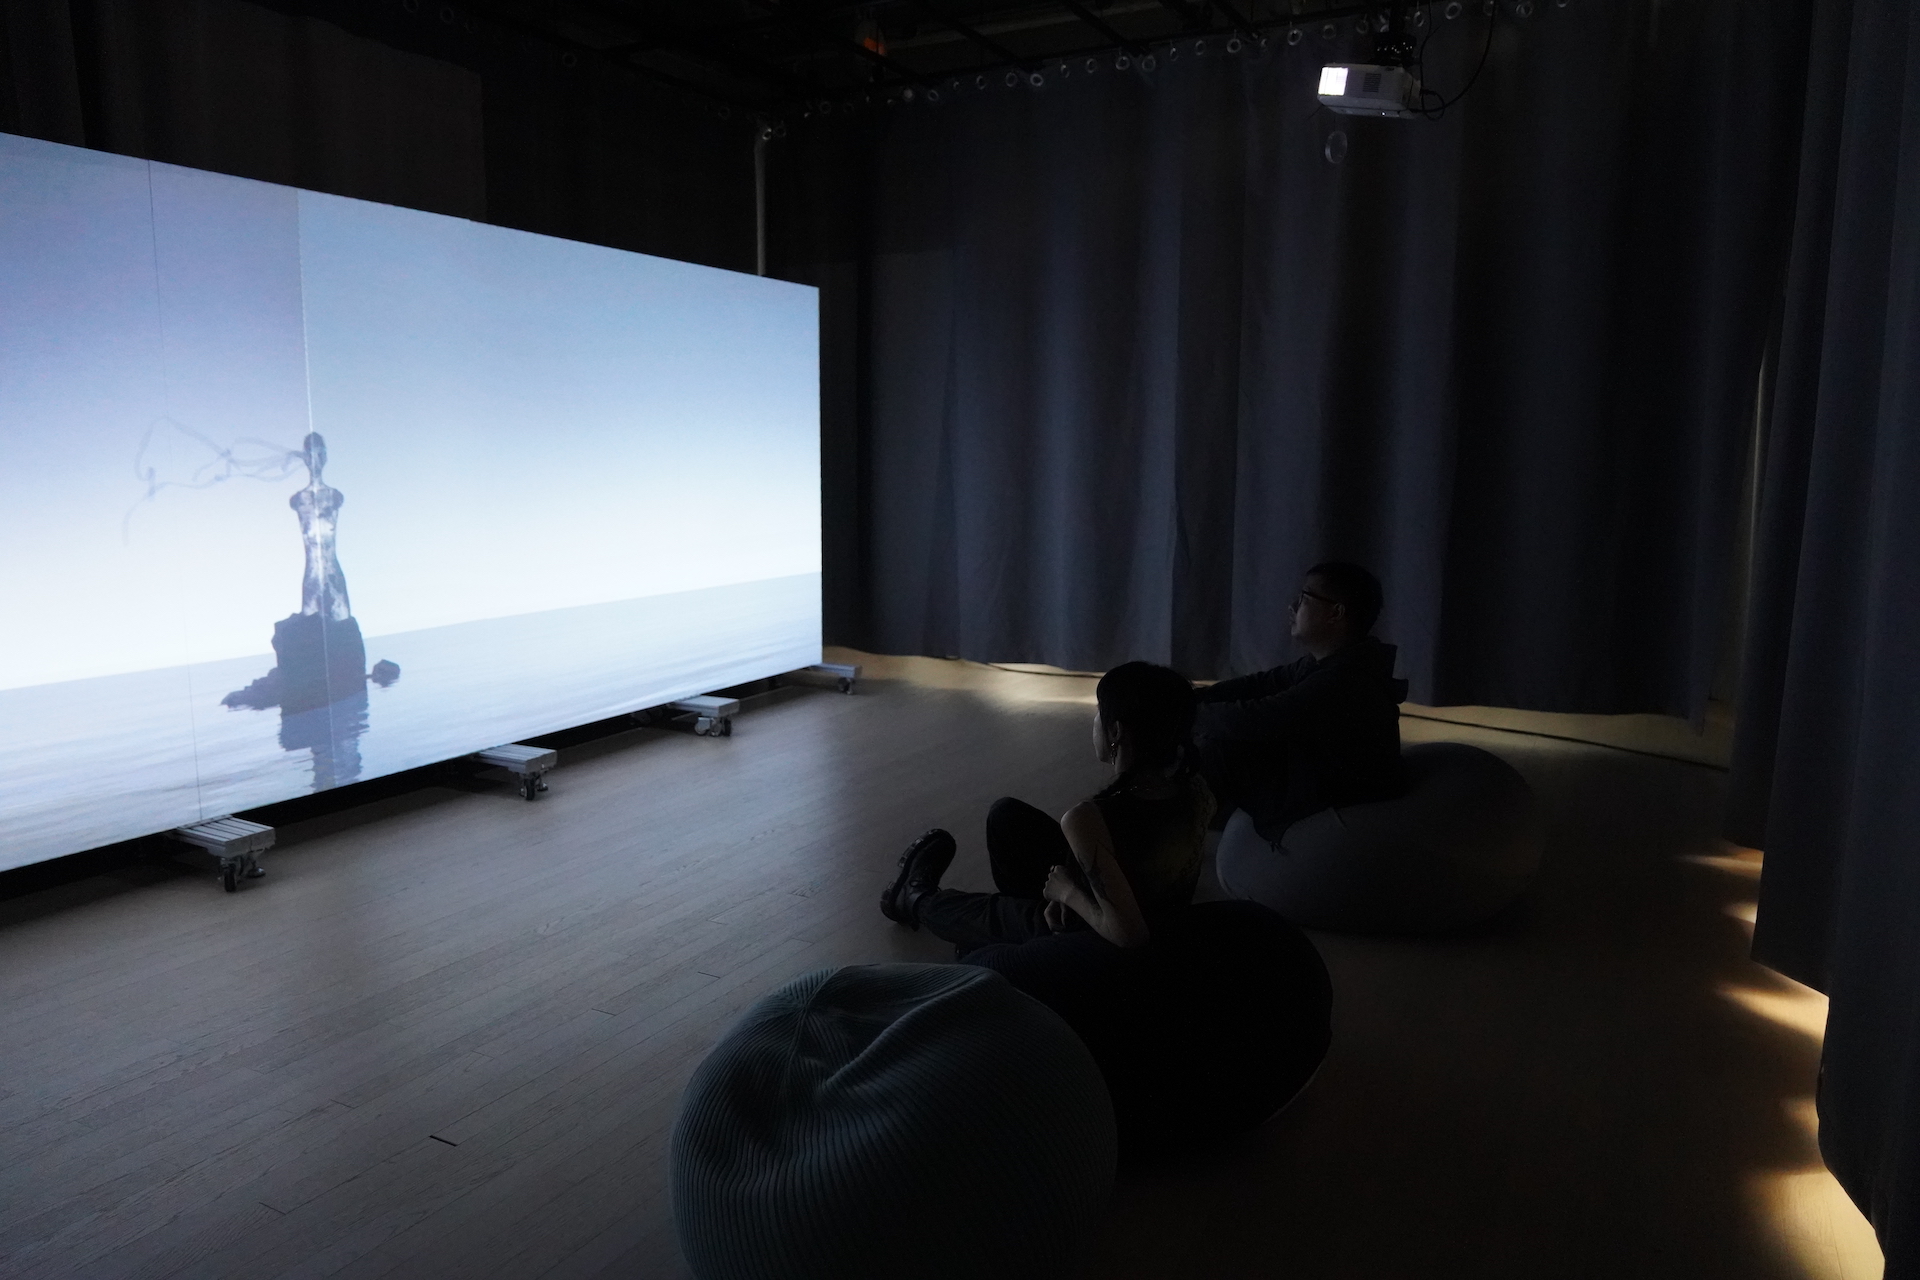 People sitting in front of a projection screen